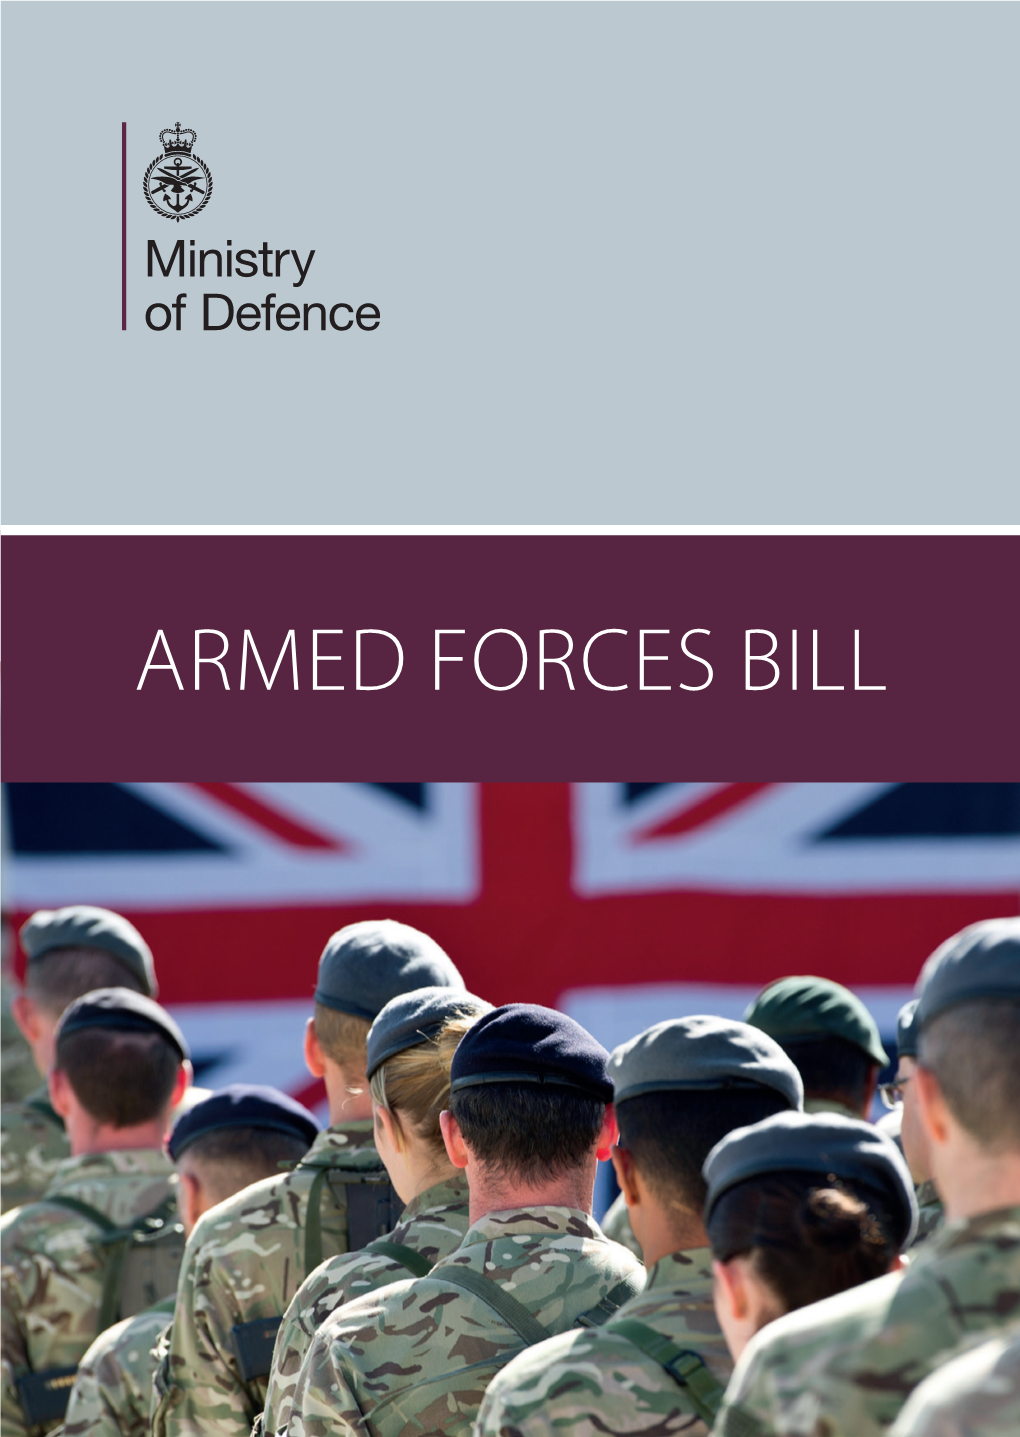 Armed Forces Bill Booklet